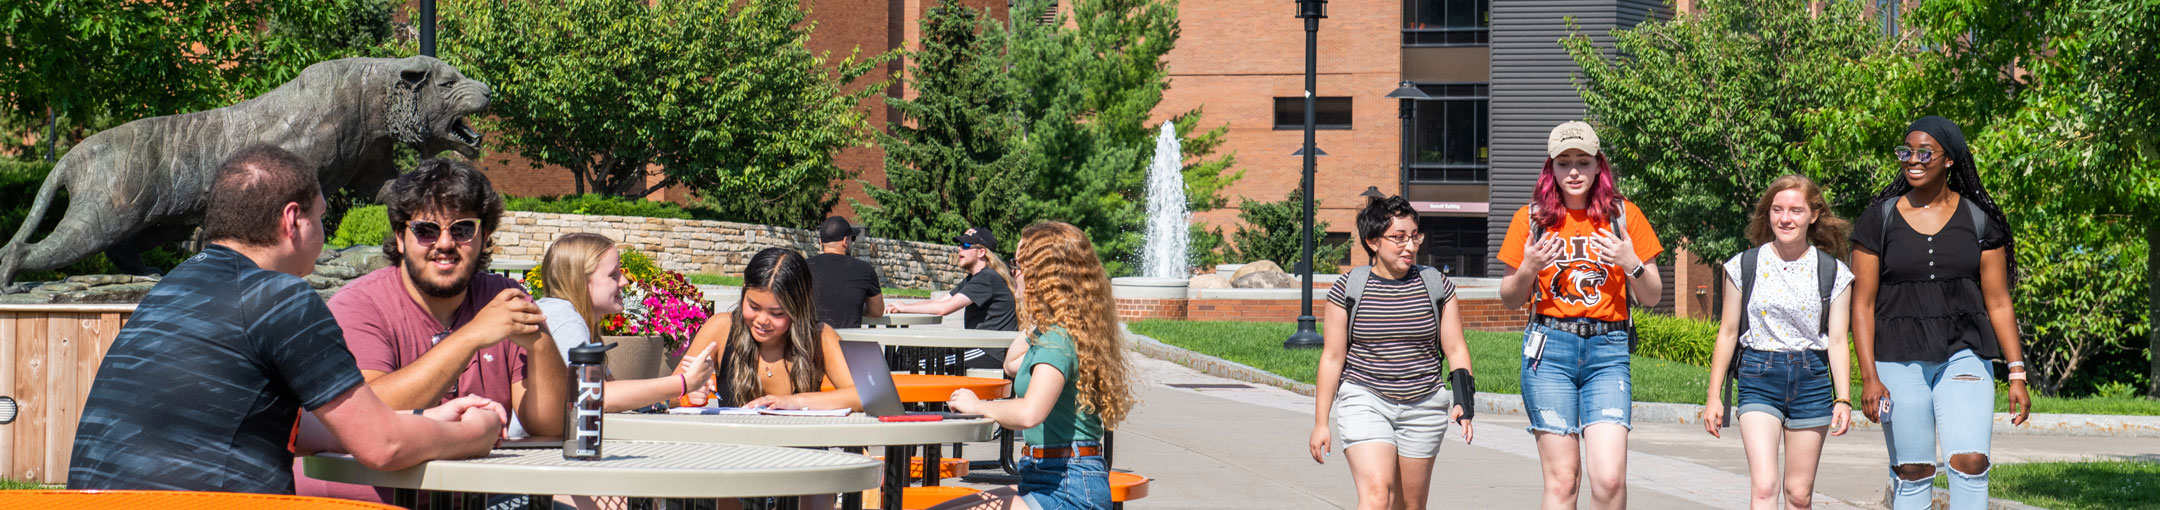 students walk past the RIT tiger statue while other students sit at a lunch table